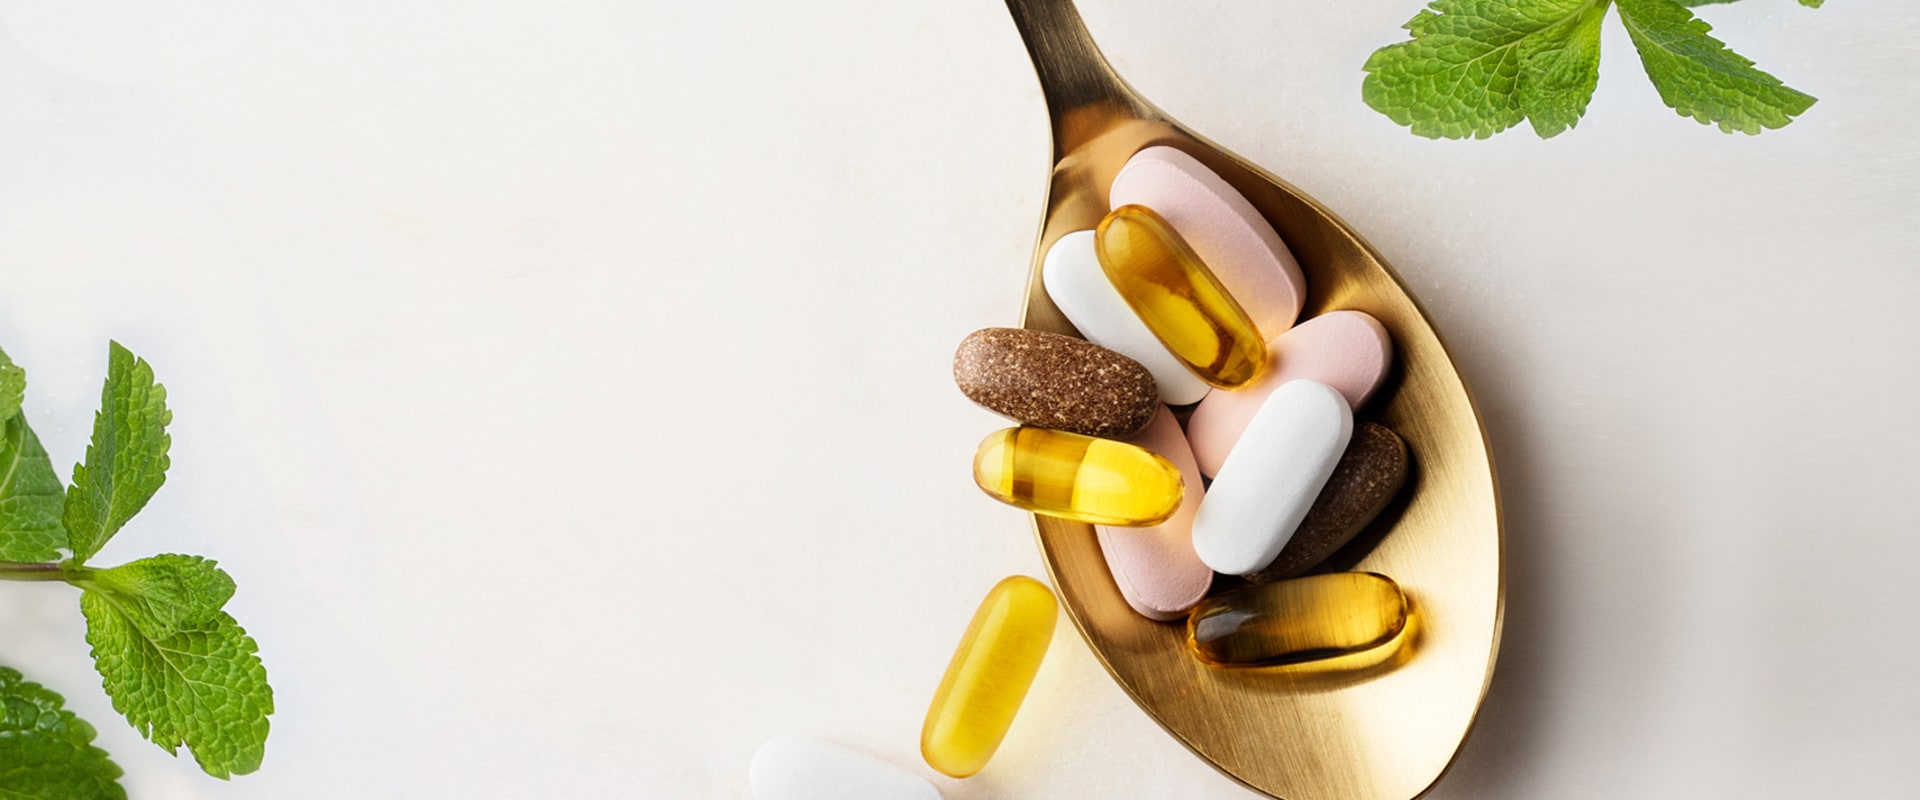 Are Dietary and Herbal Supplements Safe to Take? - A Comprehensive Guide